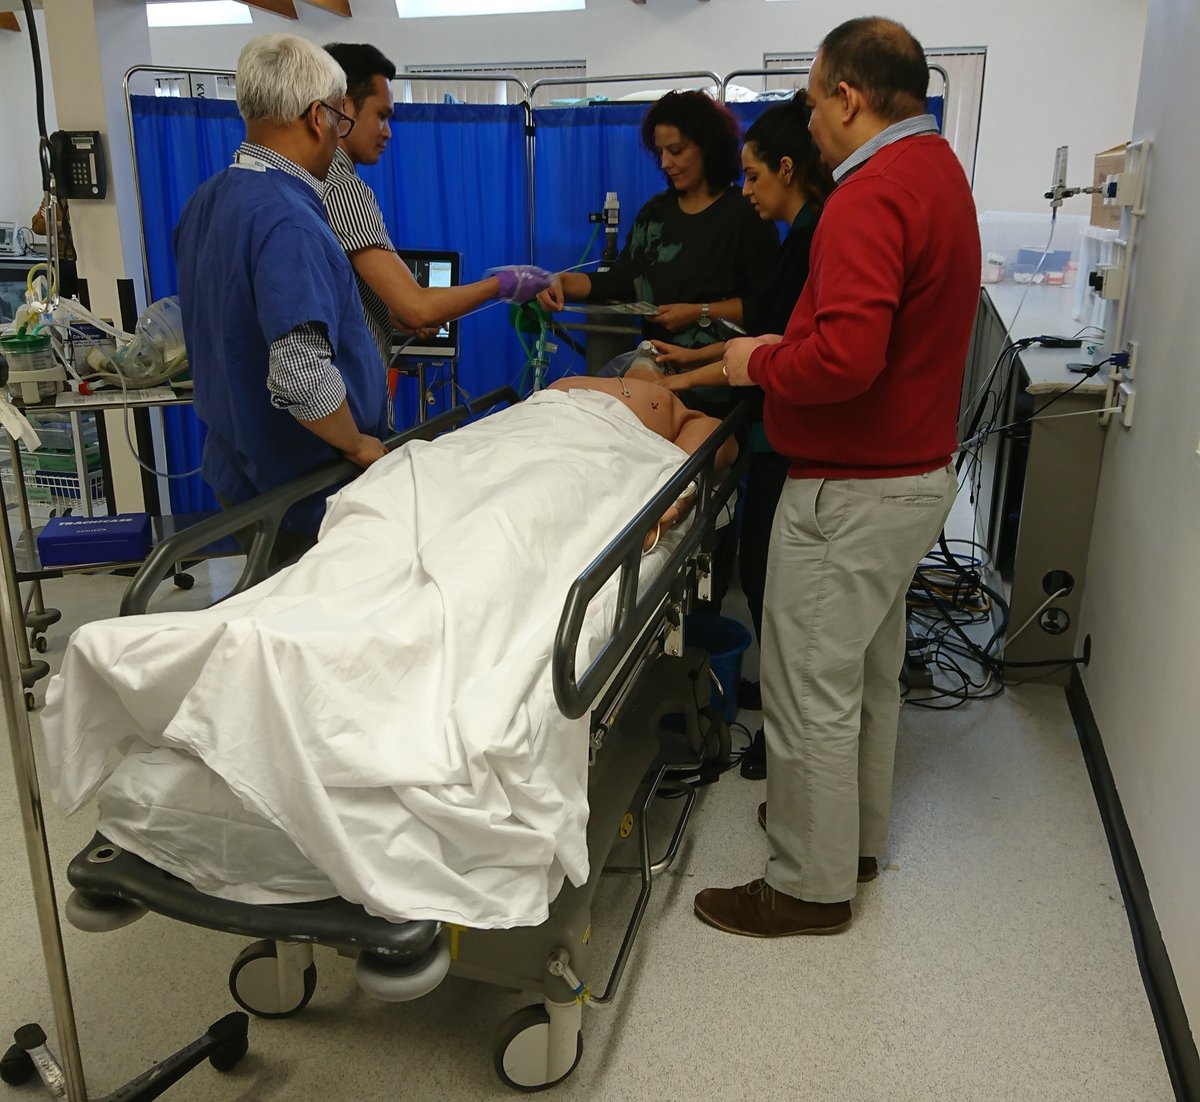 Today in the #Simulation Suite we have the START (Spinal Tracheostomy Airway Recovering Training - in case you didn't know!) Module for the #NSIC team at #StokeMandevilleHospital

#Education #Learning #Development #Sim